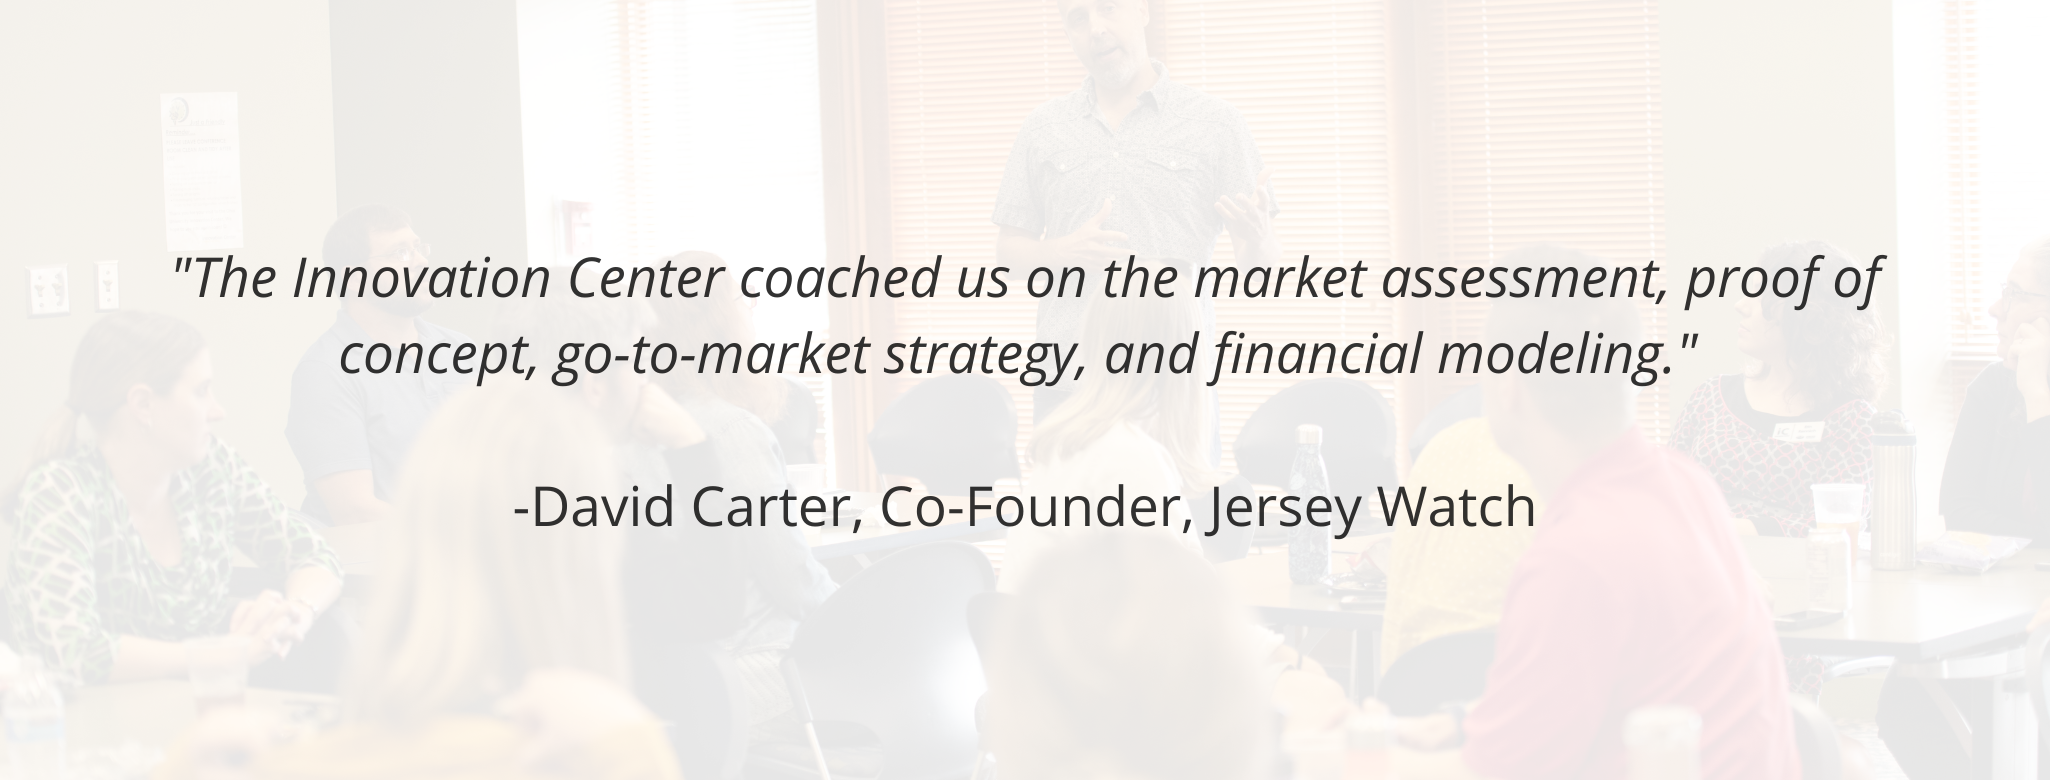 "The Innovation Center coached us on the market assessment, proof of concept, go-to-market strategy, and financial modeling."   -David Carter, Co-Founder, Jersey Watch